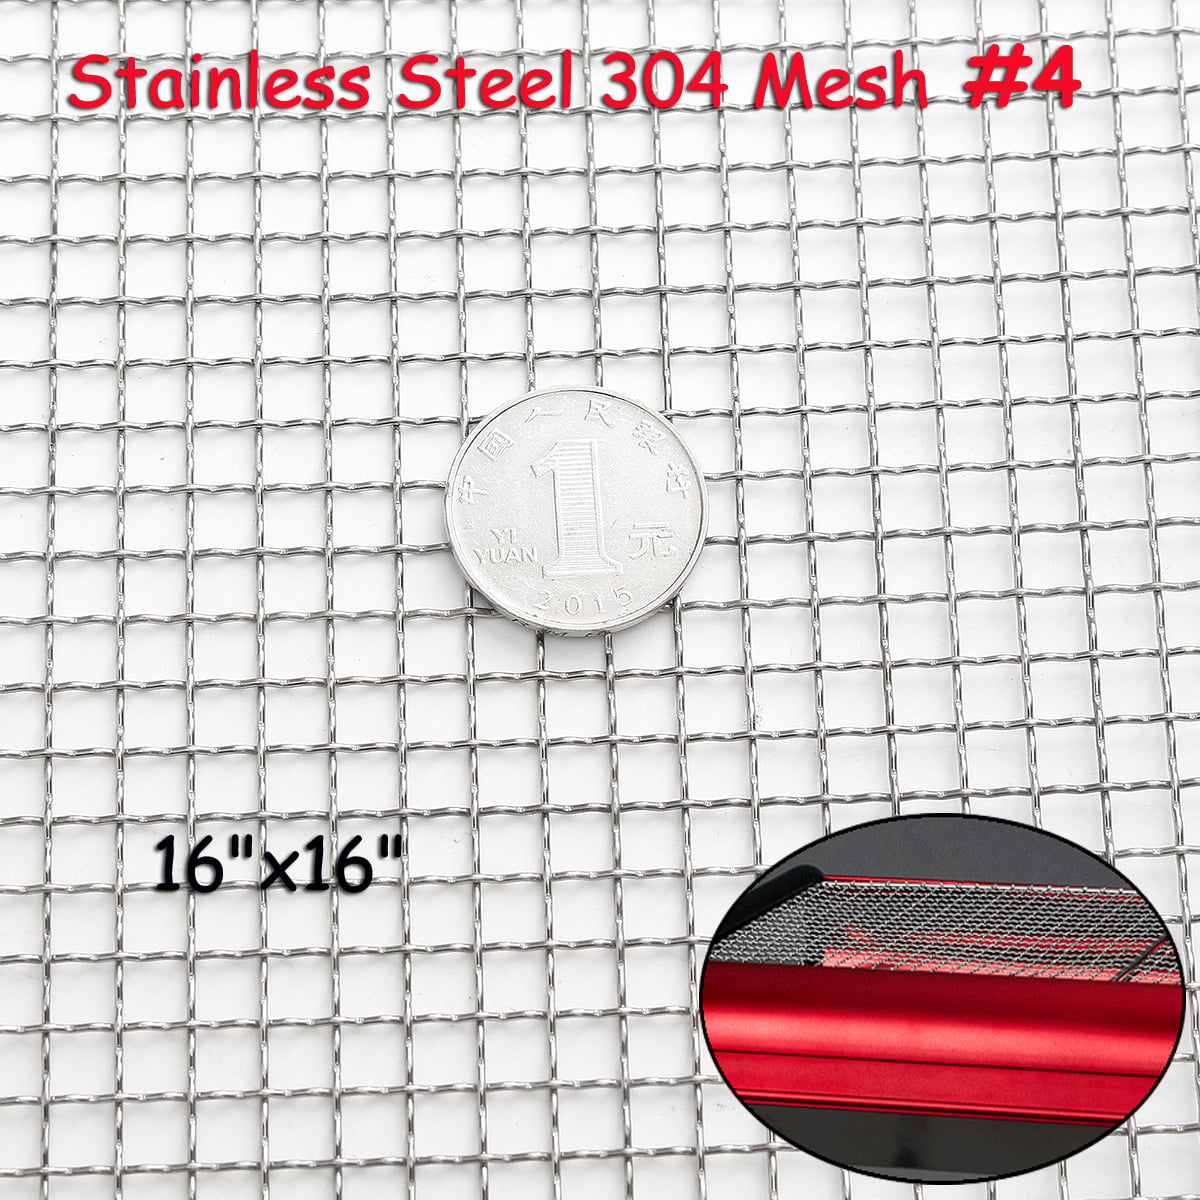 Multi-function Stainless Steel 304 Mesh #4 .047 Wire Cloth Screen 16''x16'' 